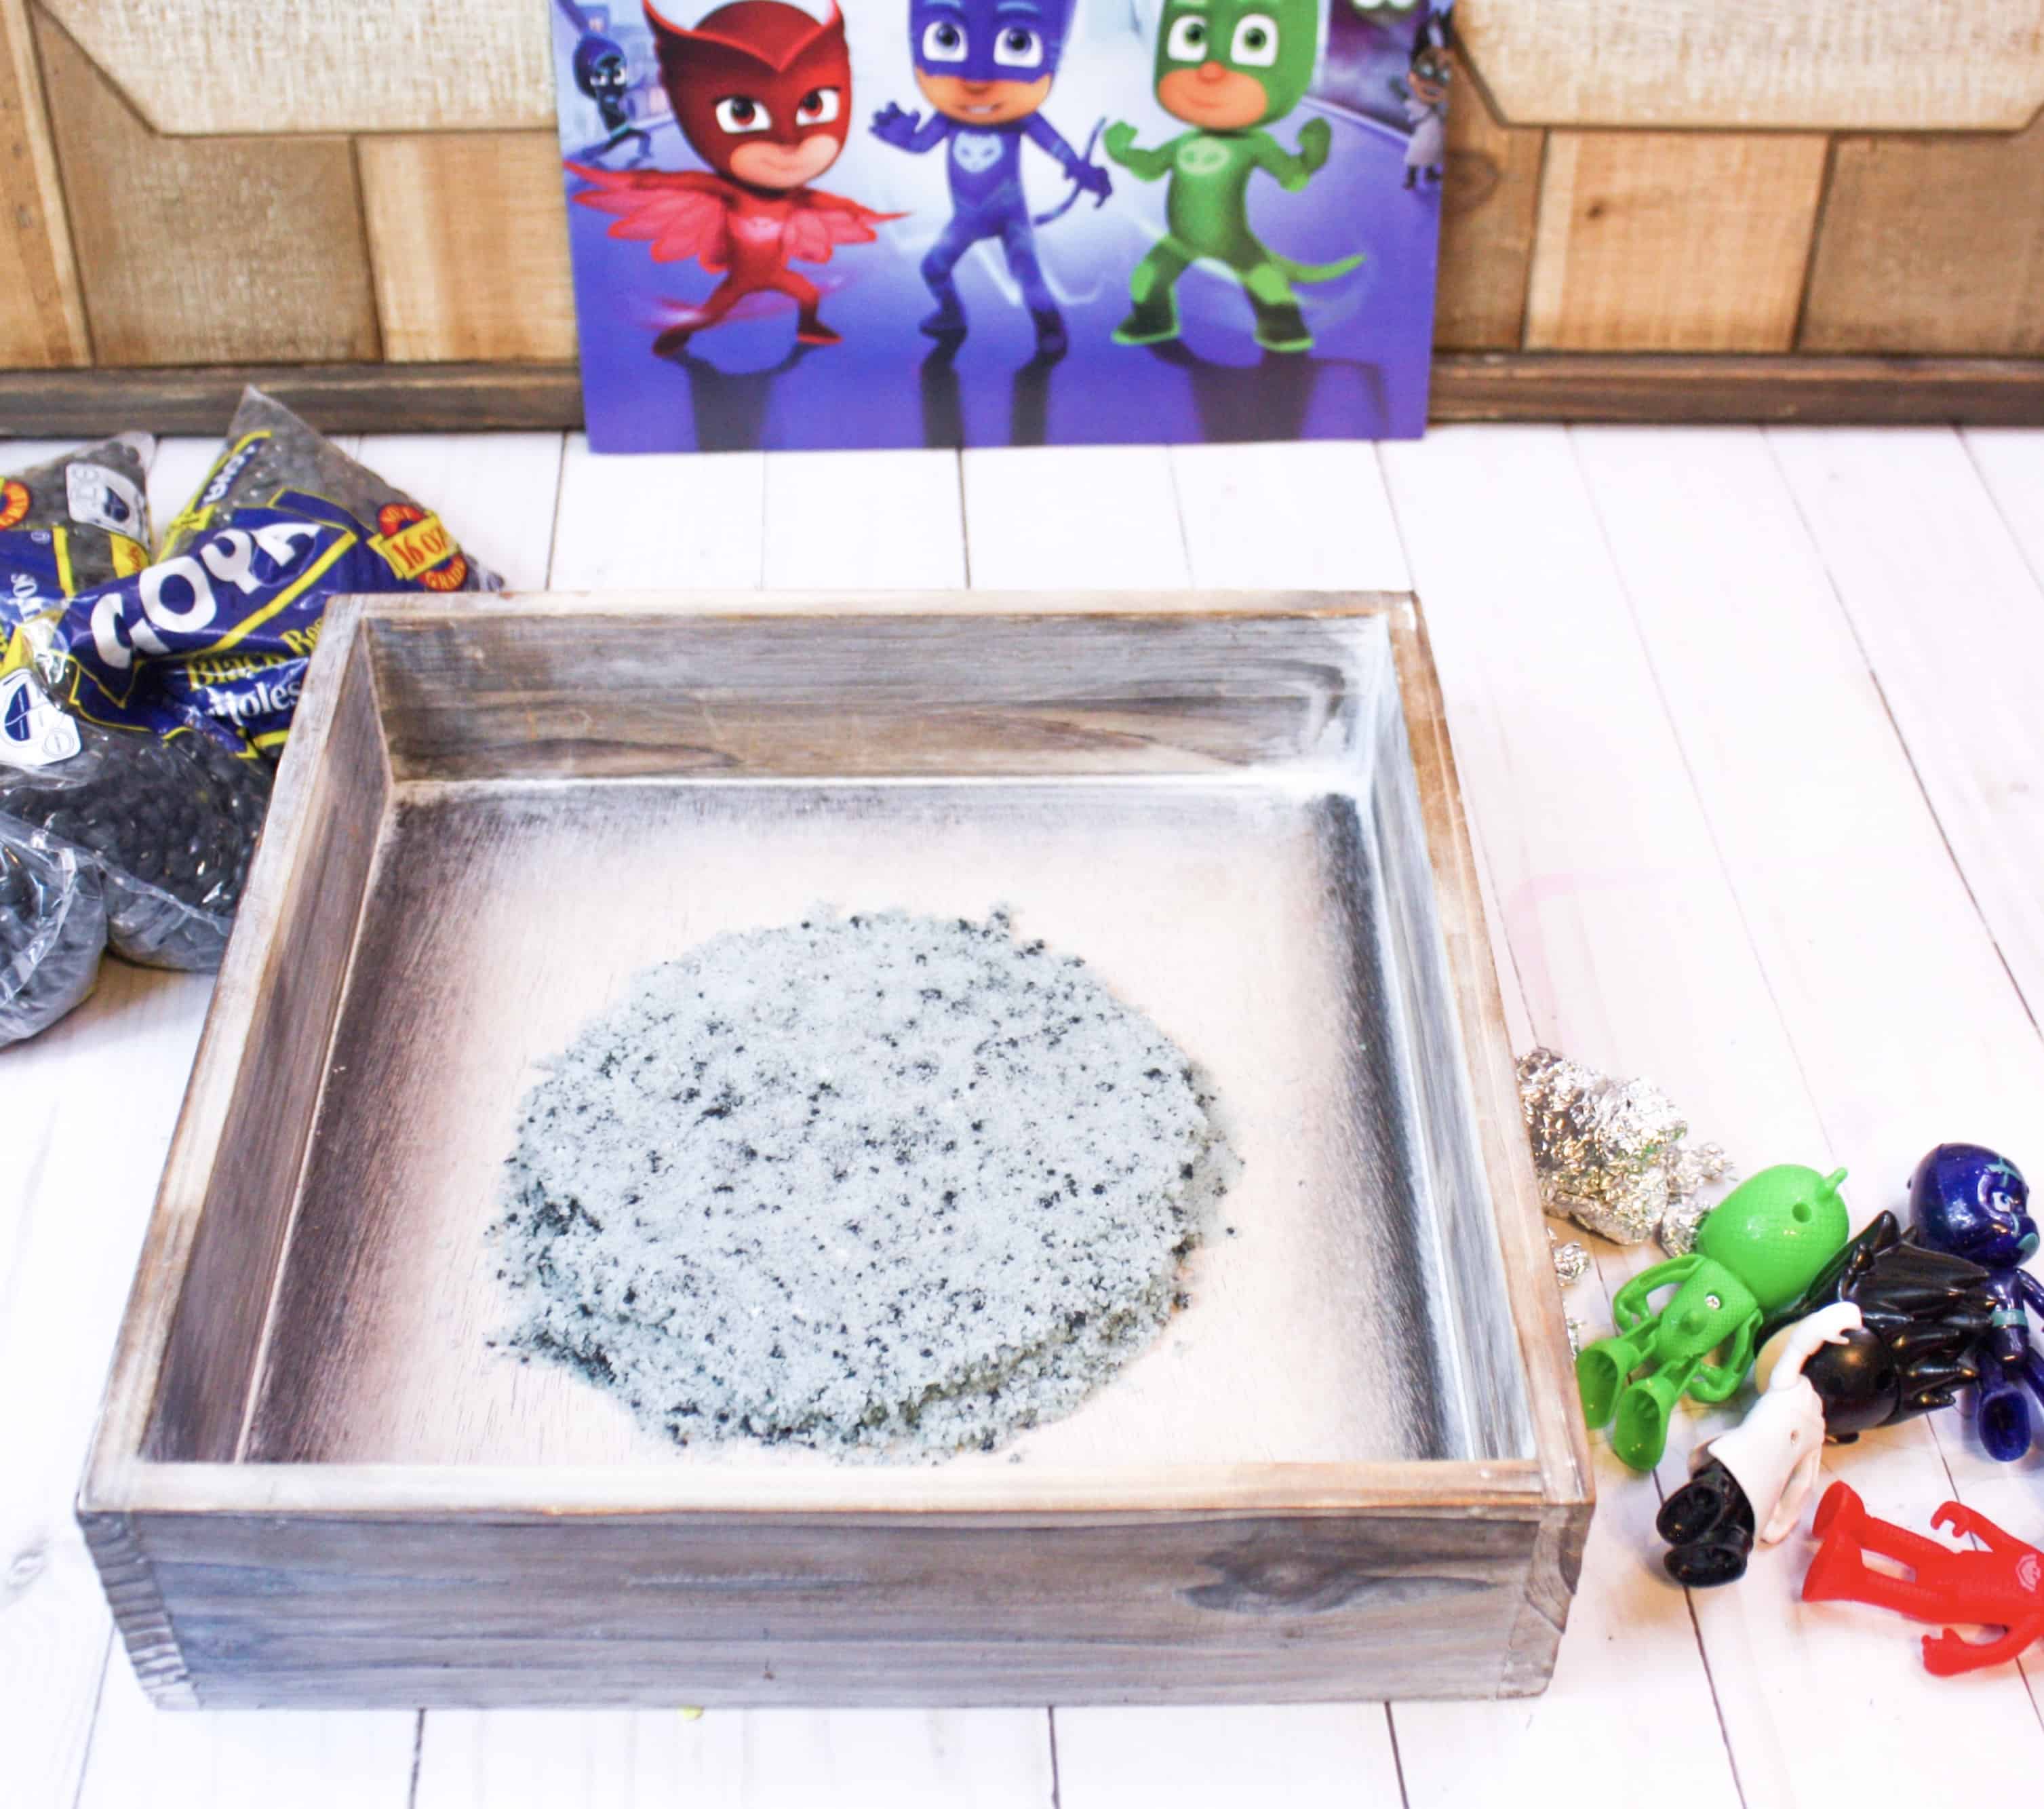 This space sensory bin uses colored salt and beans to create a fun space scene for kids to play in. Play with the PJ Masks and their Mission to the Moon! #spacetheme #sensorybin #sensoryplay #preschool #toddlers #kidsactivities #preschoolfun